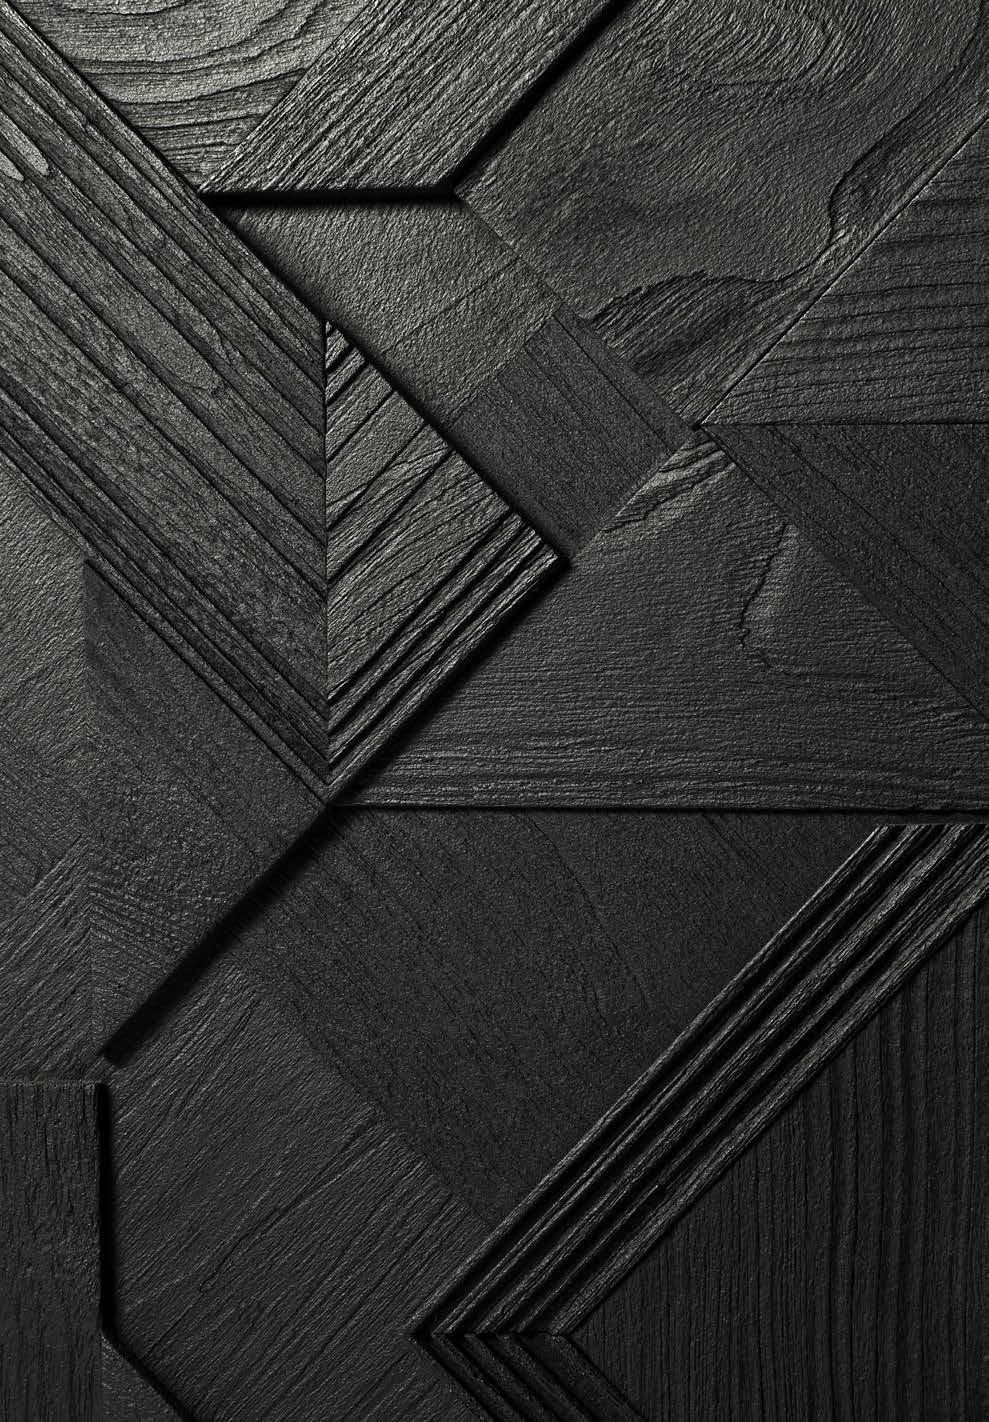 Extra dimension OUR FURNITURE IN BLACK STAINED WOOD A triangle forms the